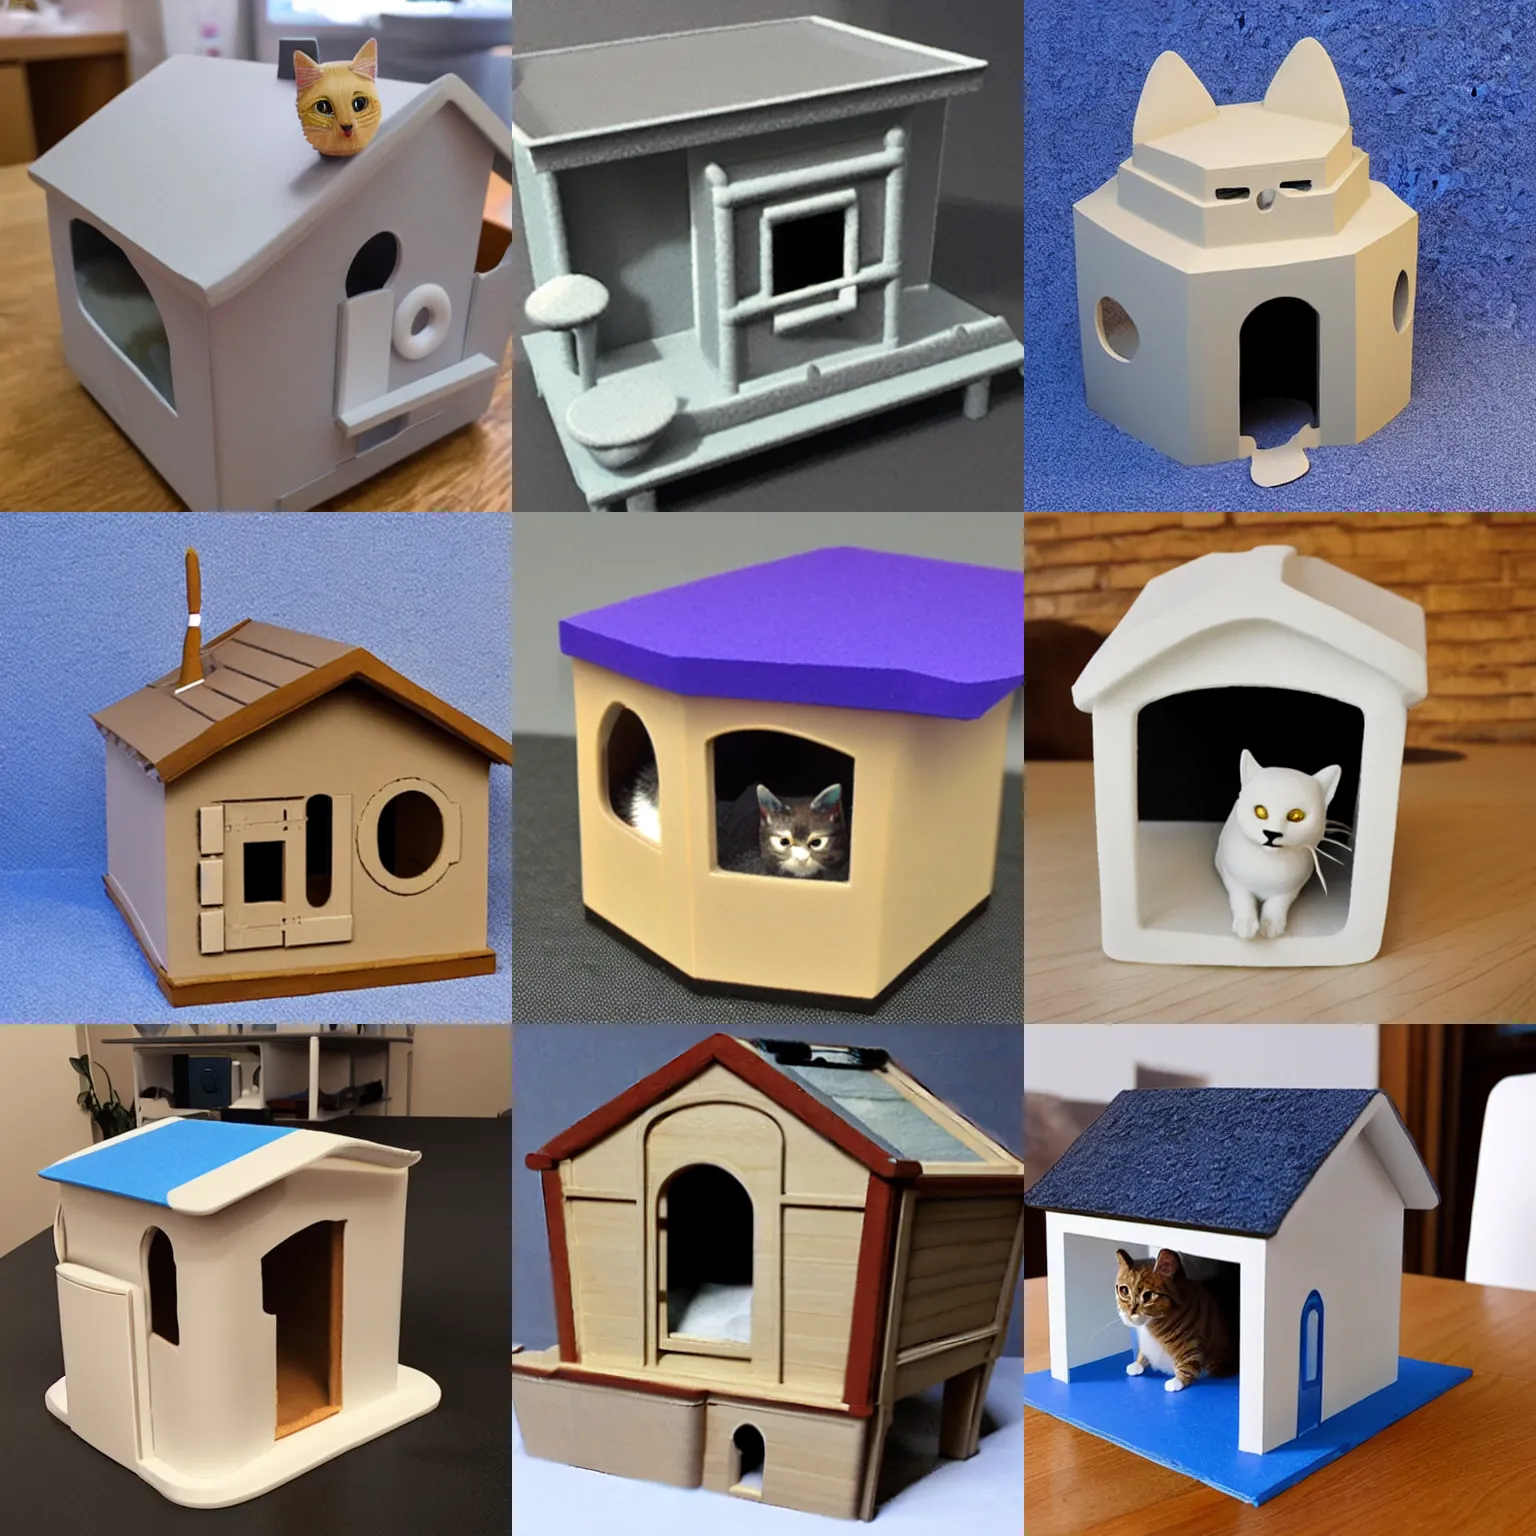 Prompt: An impressive 3D print of a model of a cat house